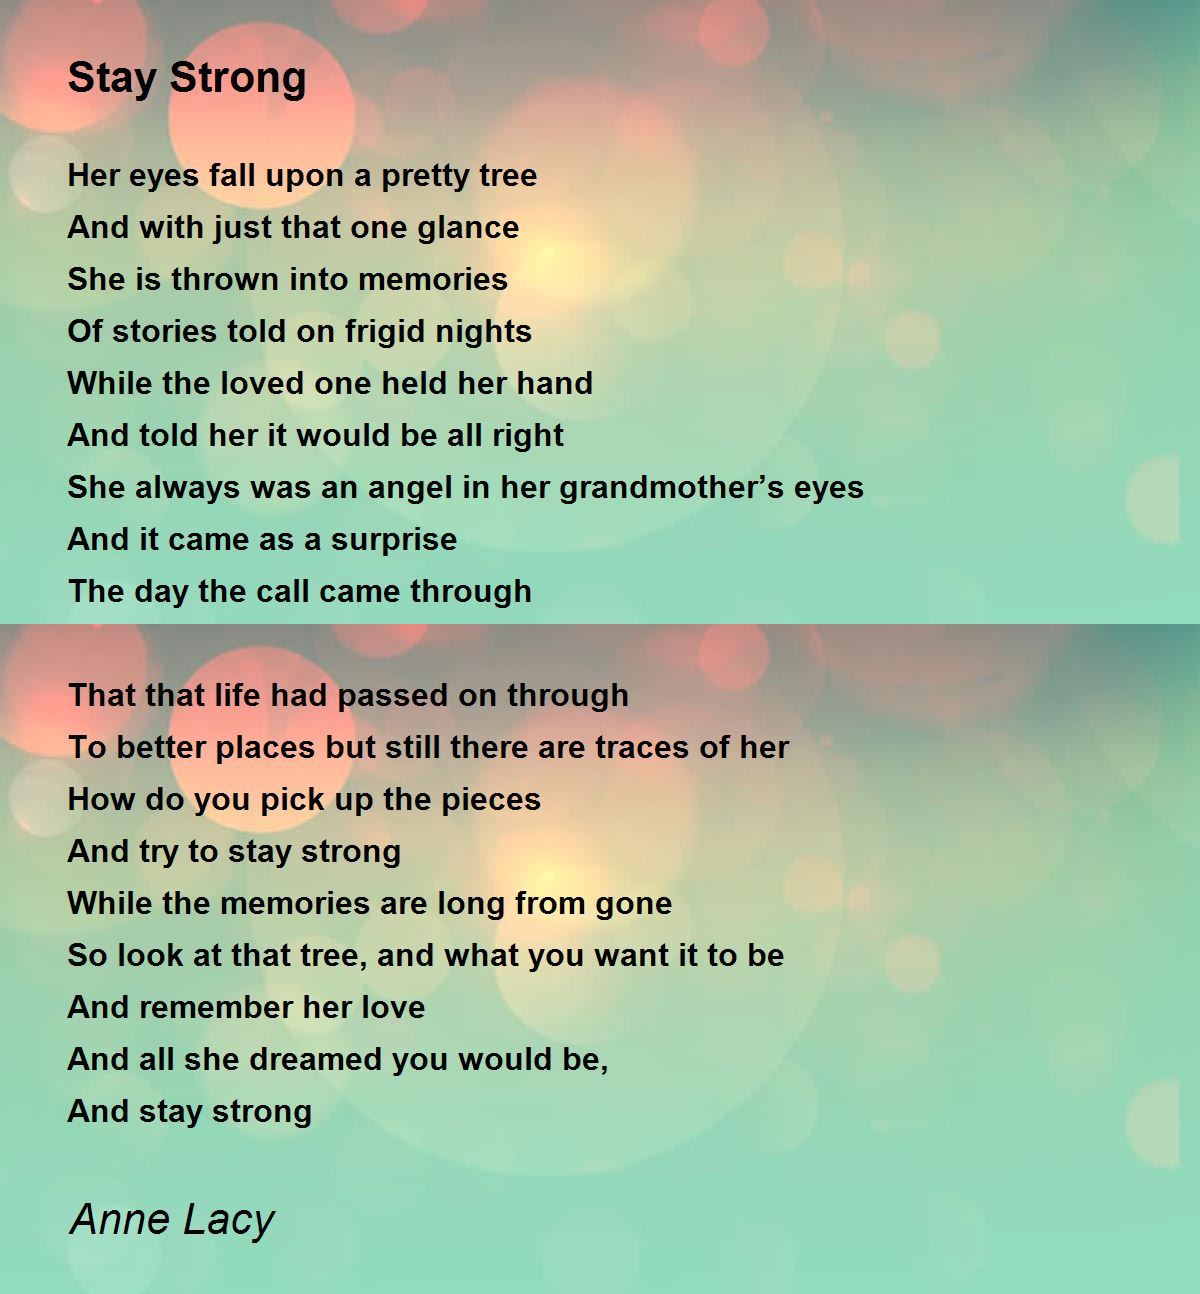 Stay Strong - Stay Strong Poem by Anne Lacy